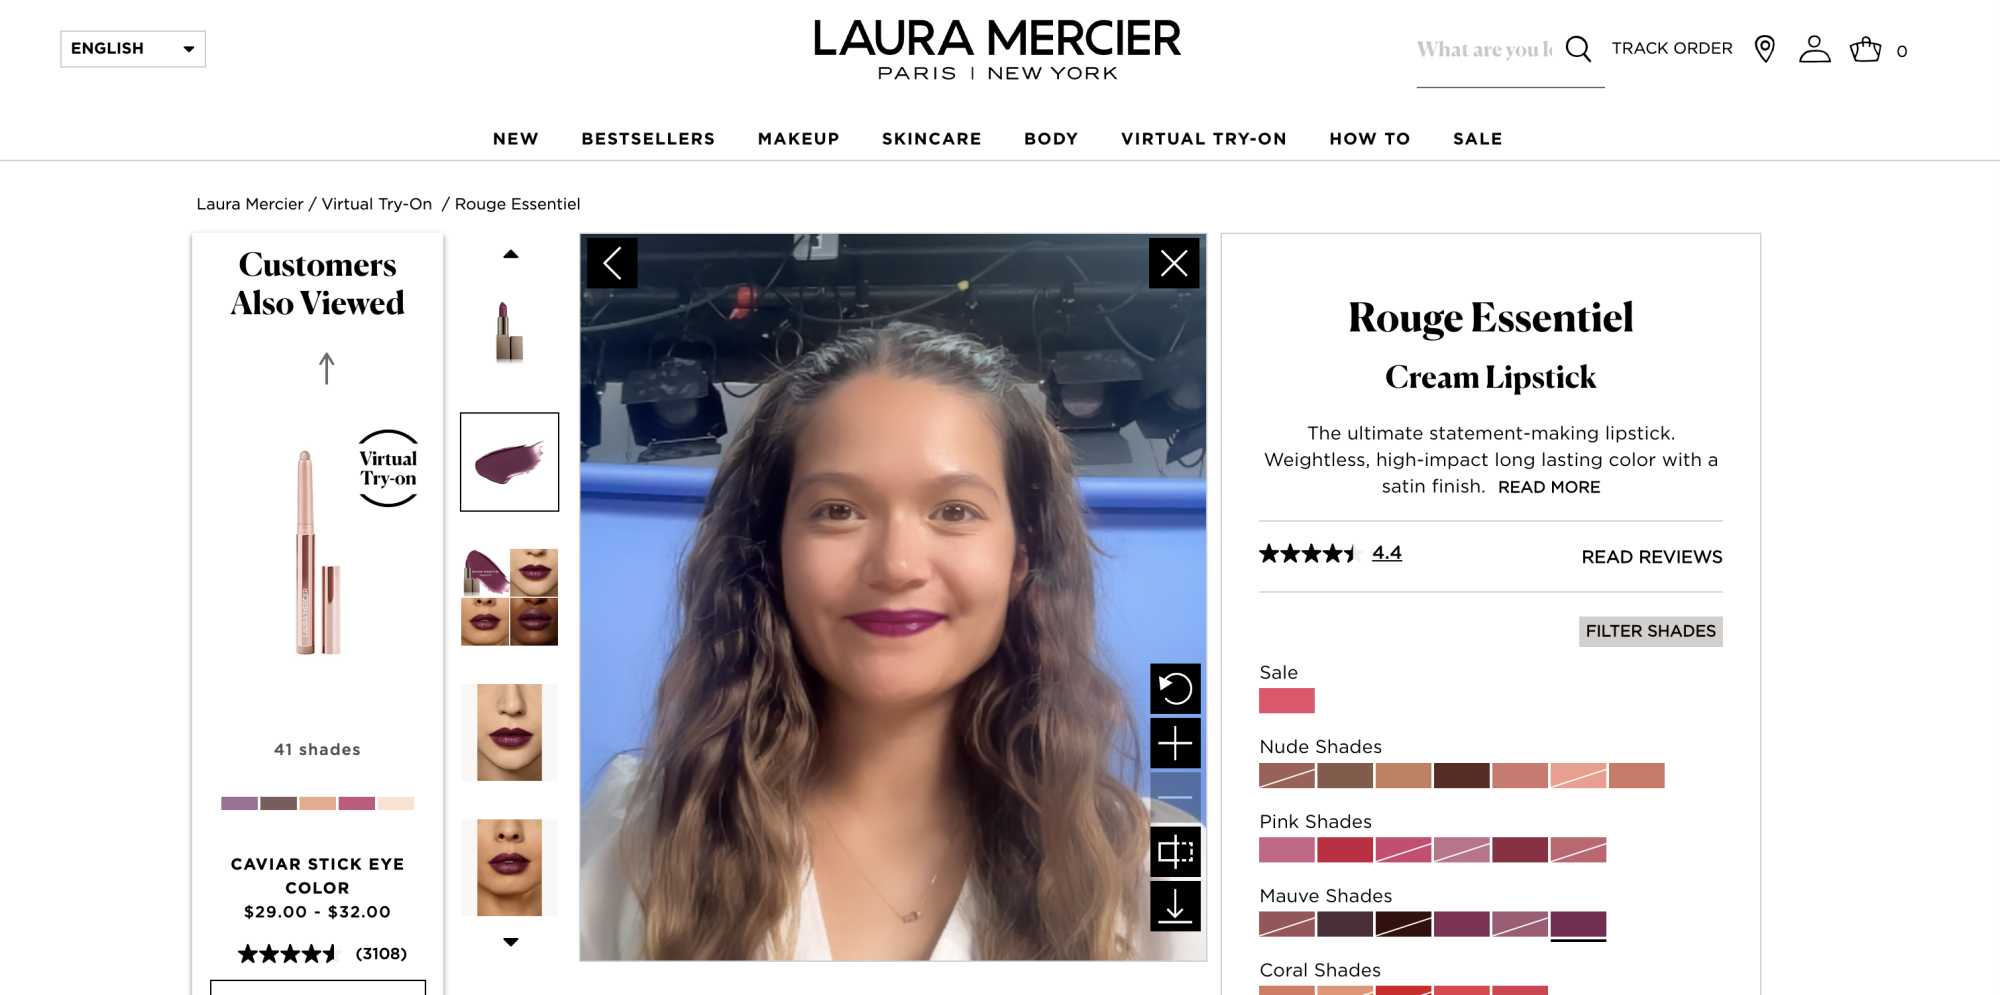 Screenshot of the online product page for Laura Mercier's lipstick, which shows Jennimai virtually wearing a shade of purple lipstick next to various color options.